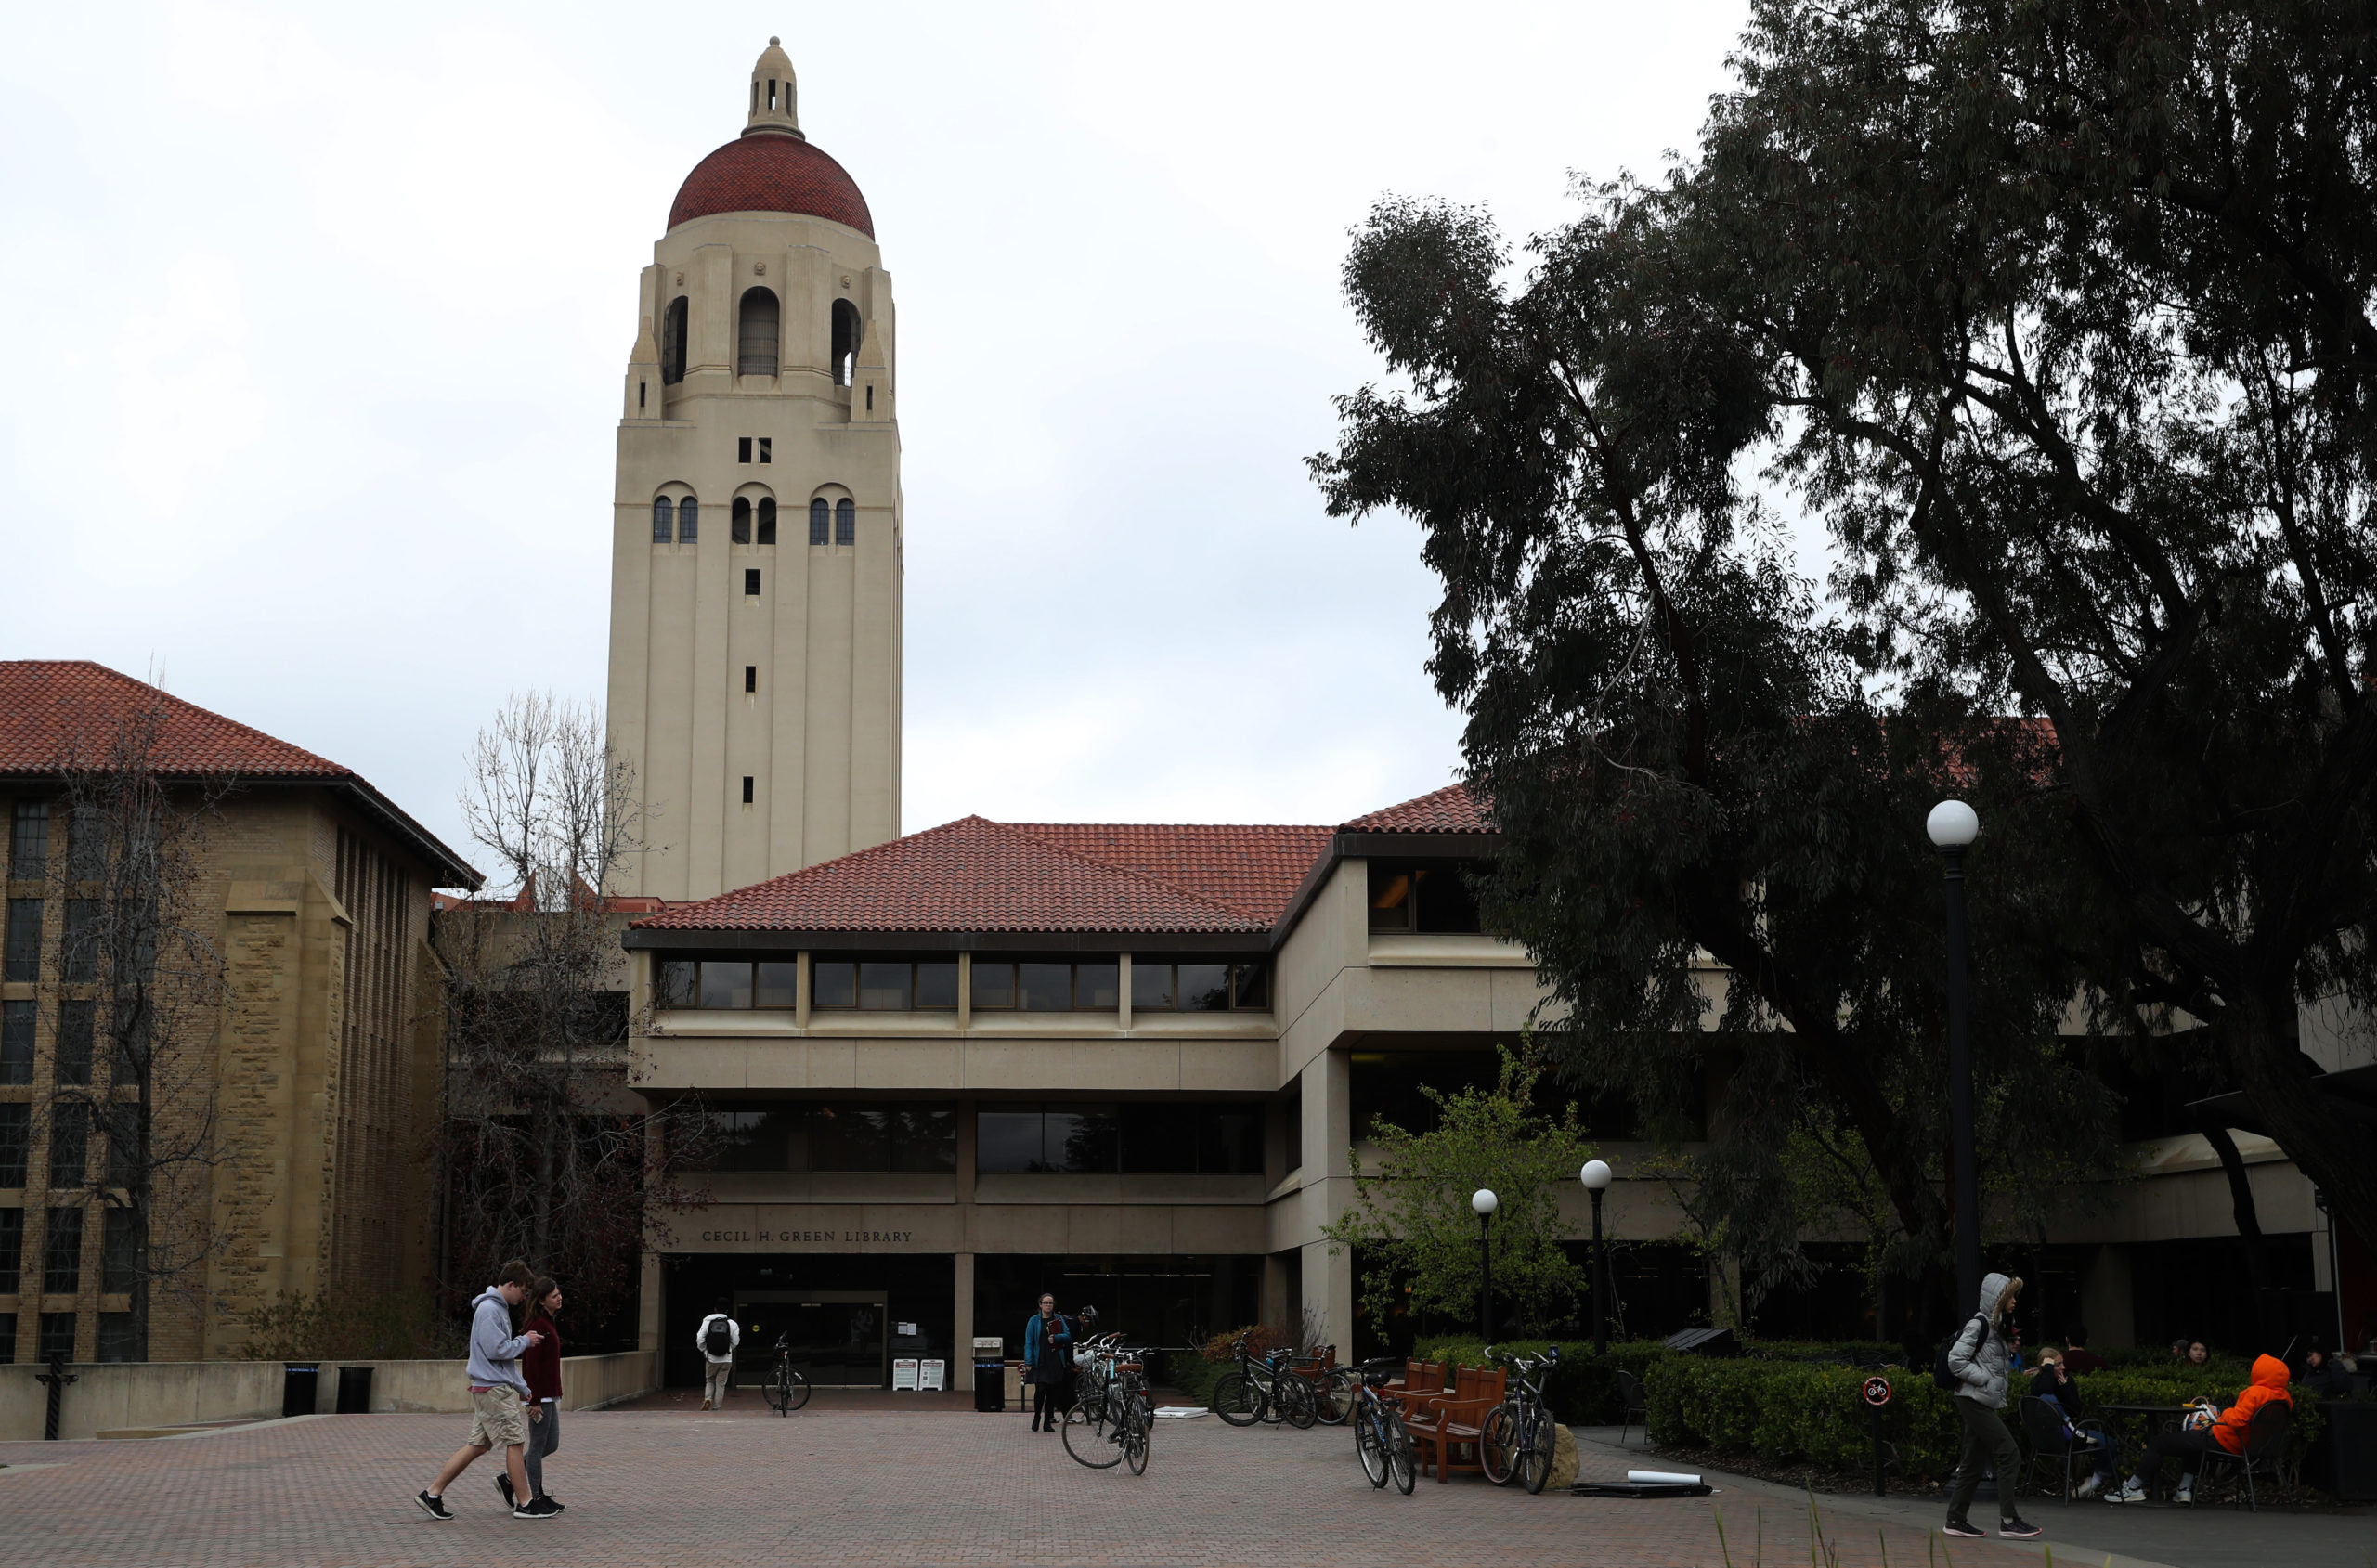 People walk by Hoover Tower on the Stanford University campus on March 12, 2019 in Stanford, California. (Photo by Justin Sullivan/Getty Images)